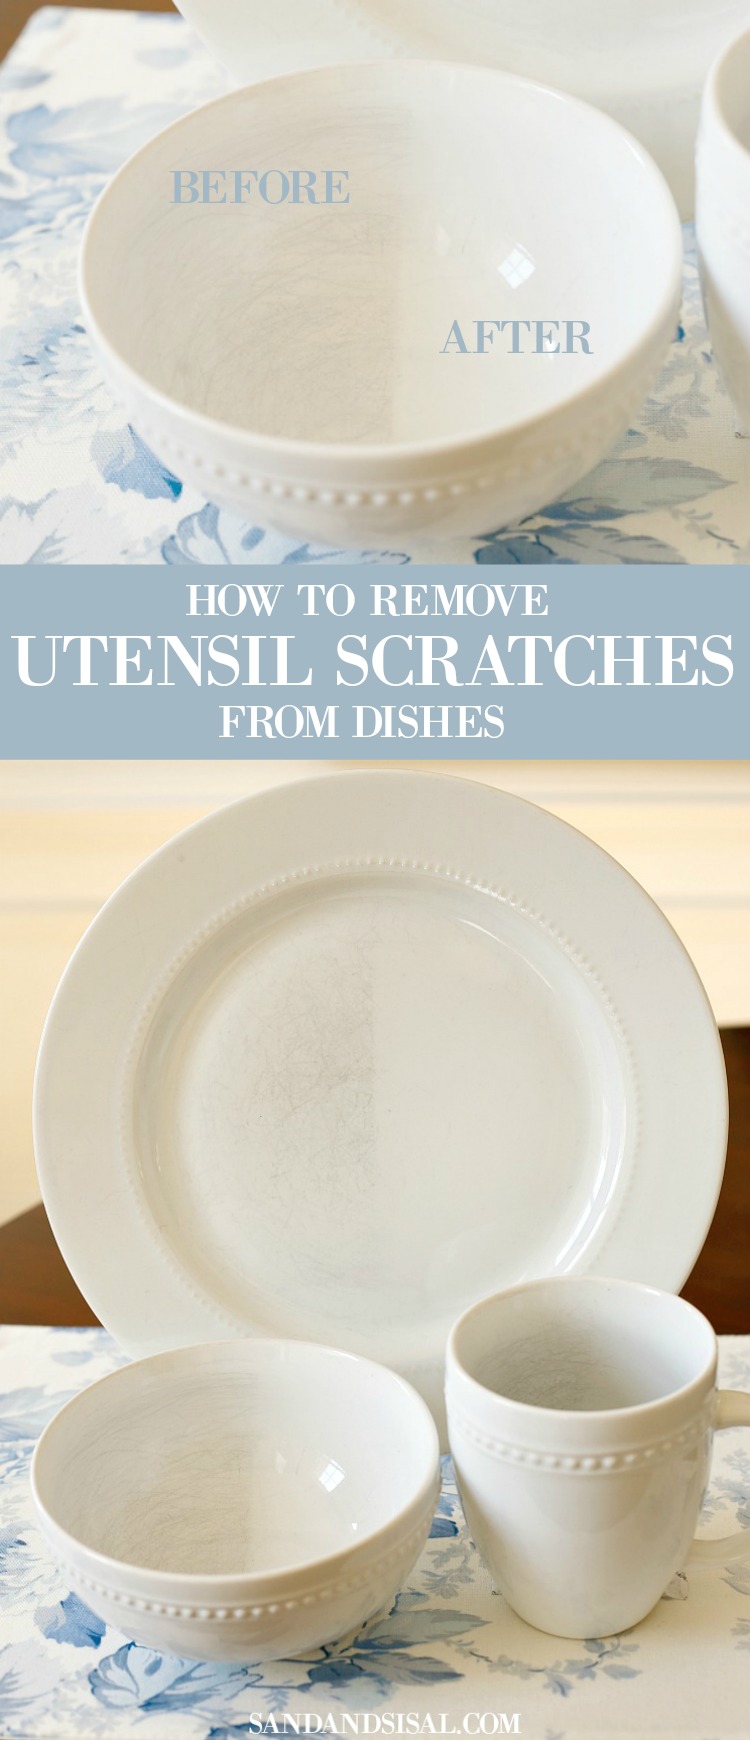 STOP! Don't throw away your dishes! Click through to learn How to Remove Utensil Scratches from Dishes! Seriously amazing. This will be one popular pin to put on your must try list!